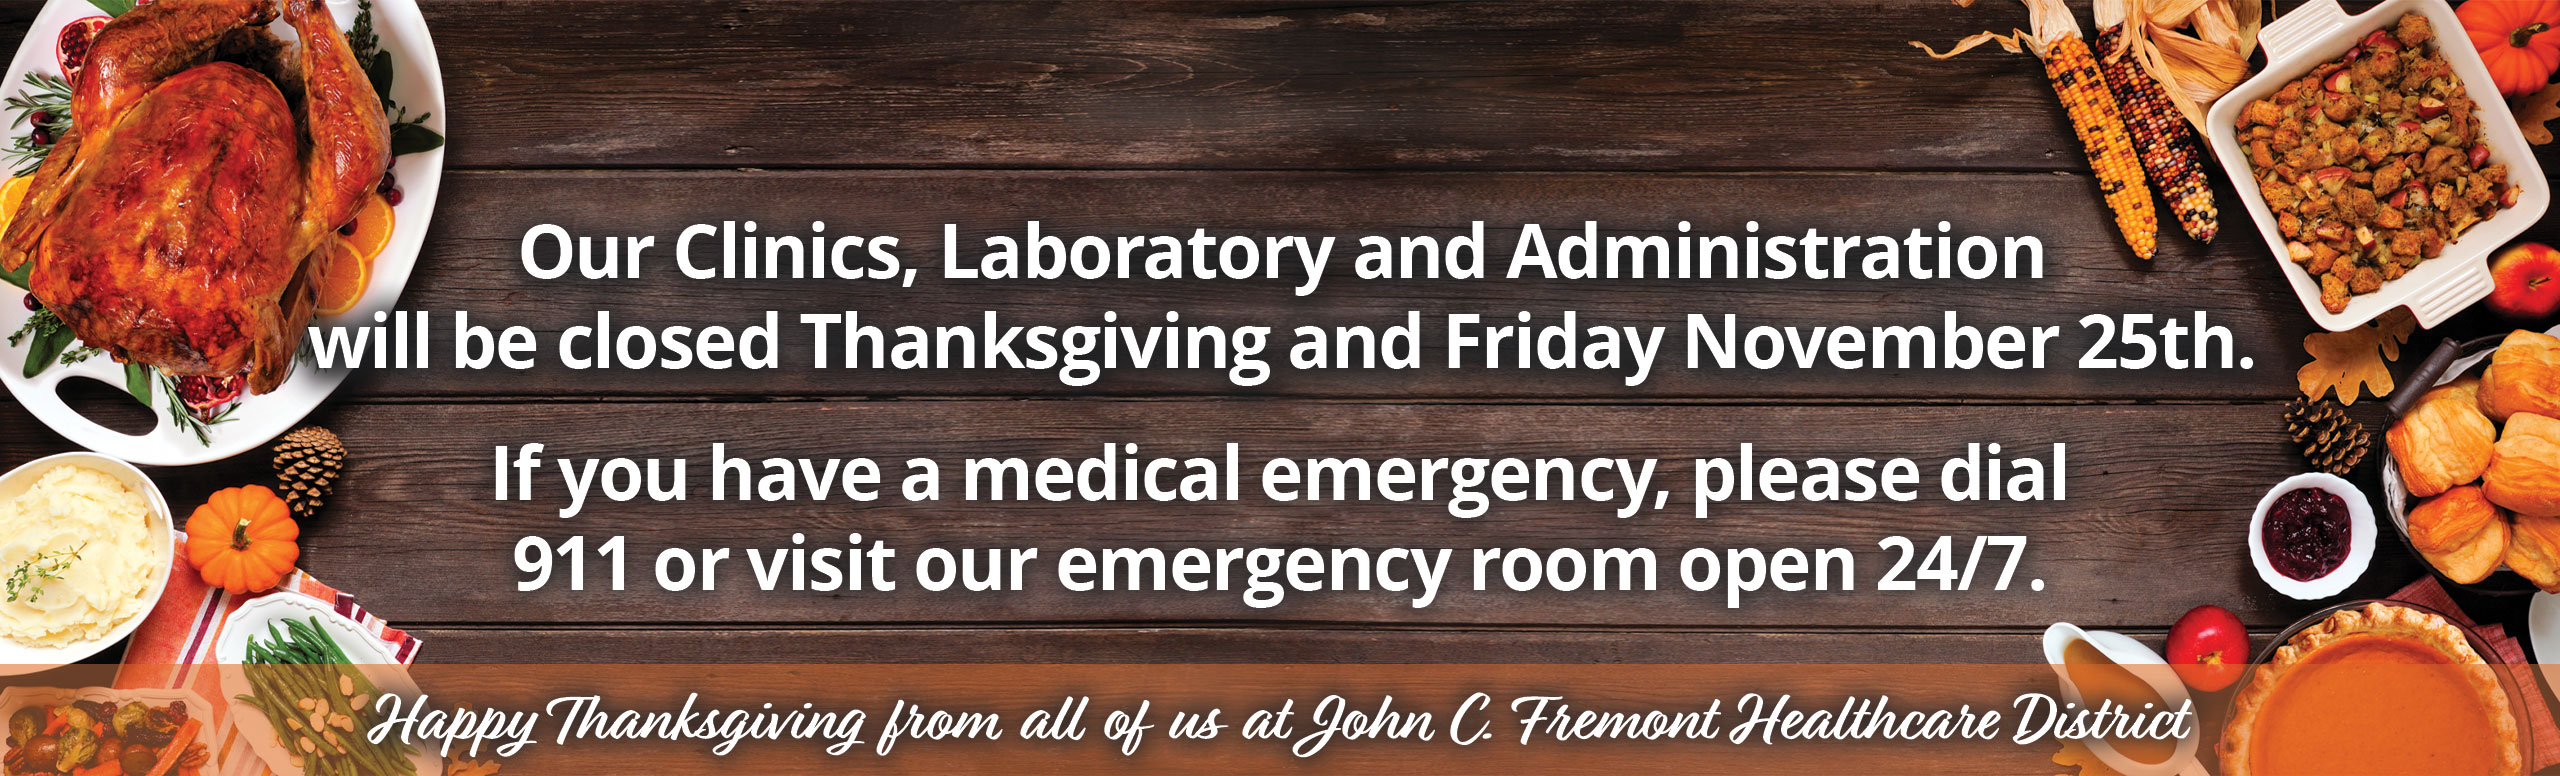 Pictured is a feast of thanksgiving dinner with a banner that states 
Our Clinics, Laboratory and Administration
will be closed Thanksgiving and Friday November 25th.

If you have a medical emergency, please dial
911 or visit our emergency room open 24/7.

Happy Thanksgiving from all of us at John C. Fremont Healthcare District